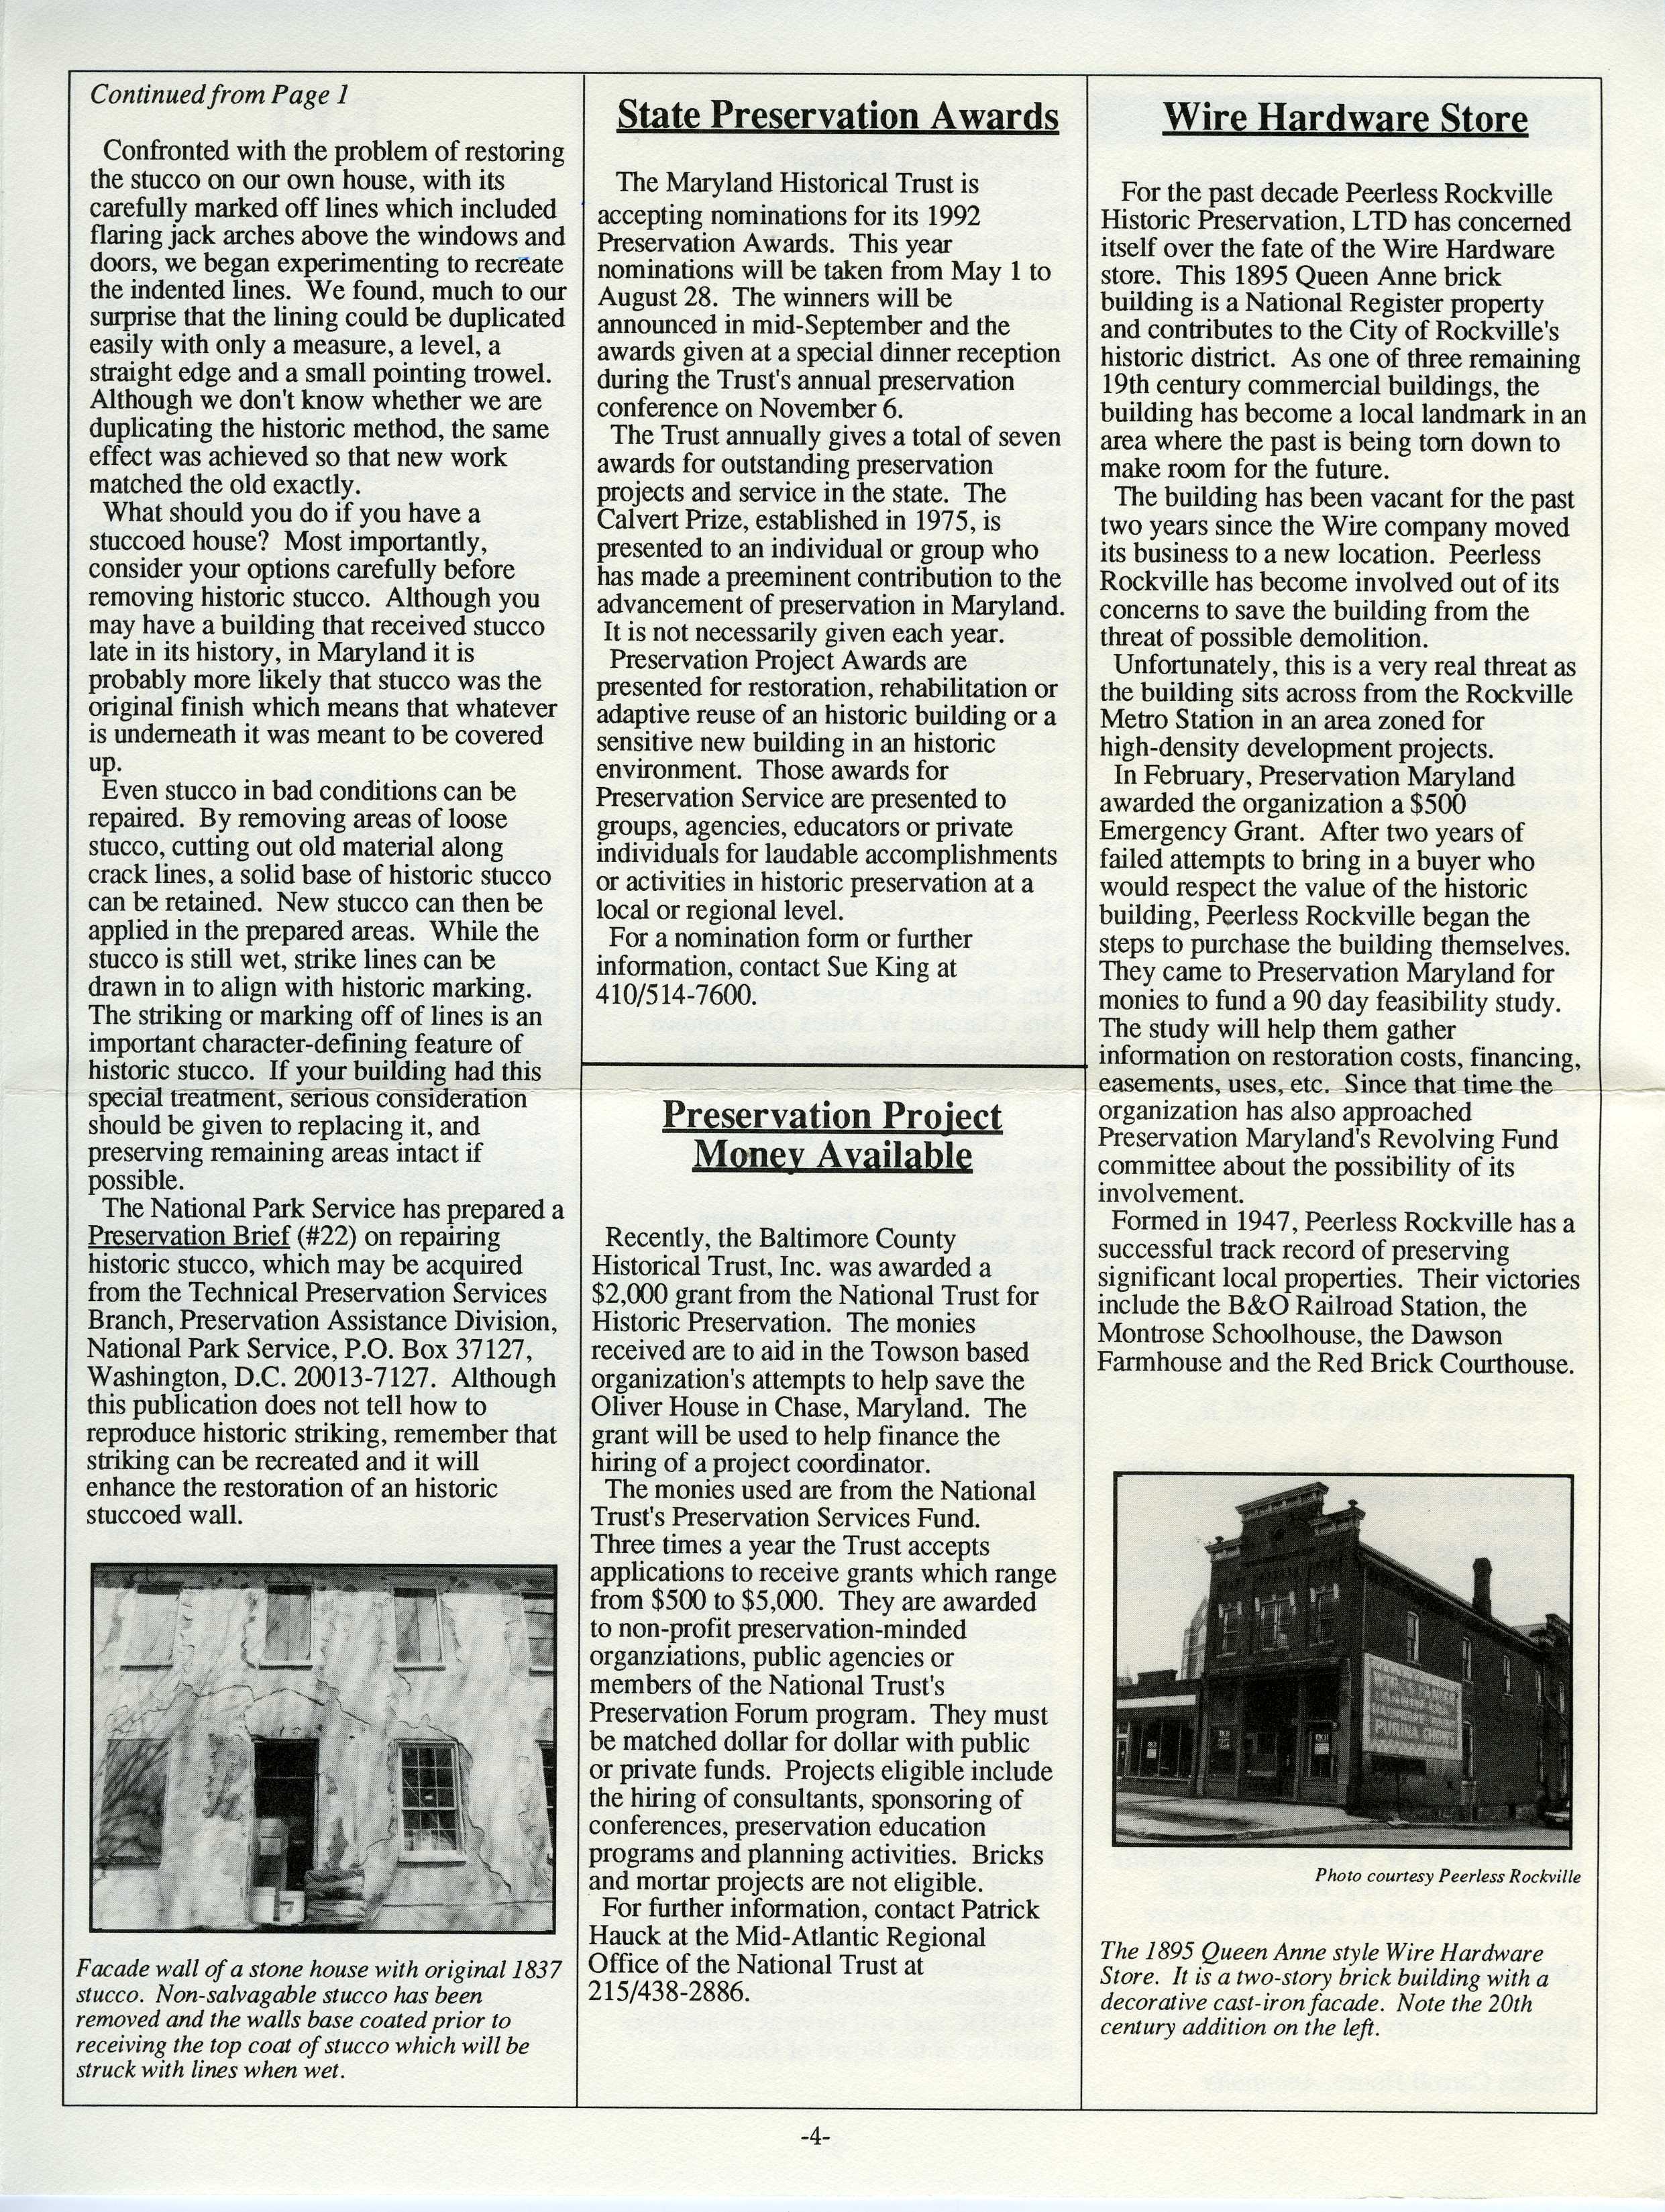 Preservation Maryland makes $500 grant to Peerless to purchased Wire Hardware. Image from The Phoenix May/June 1992.